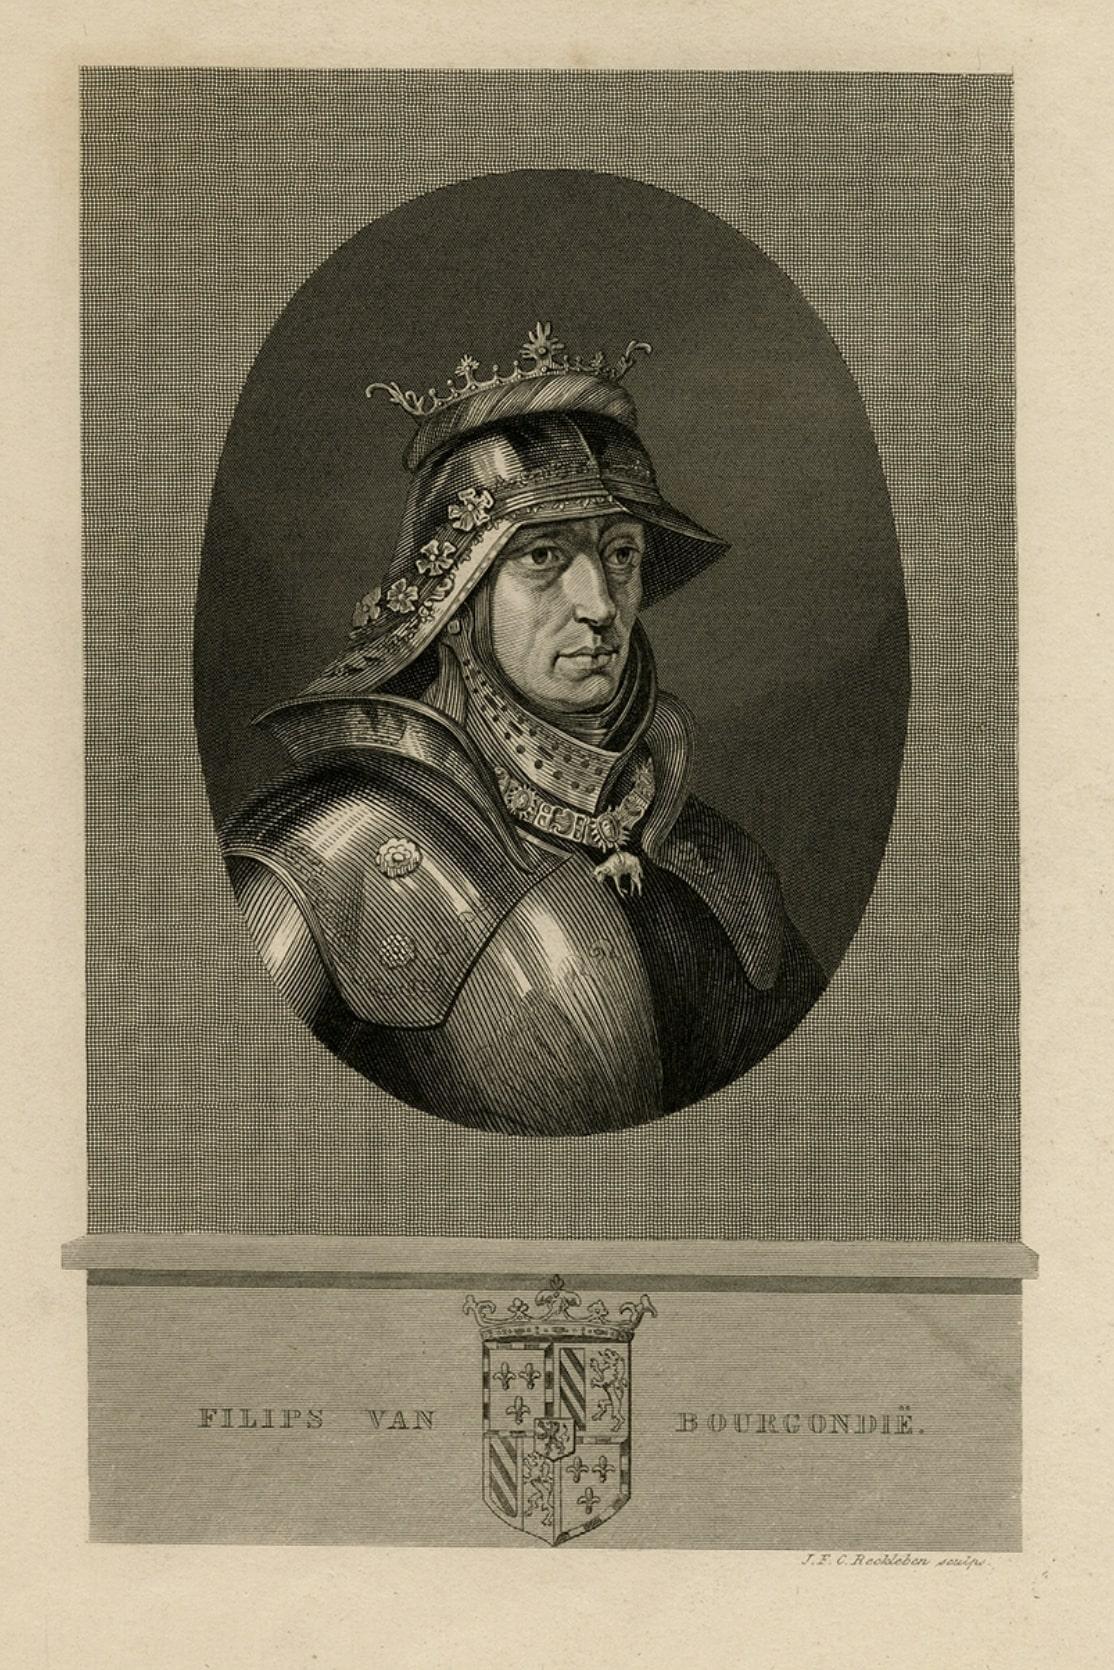 Antique print, titled: 'Filips van Bourgondie' - 

Portrait of Philip the Good (French: Philippe le Bon, Dutch: Filips de Goede; 1396-1467), Duke of Burgundy as Philip III from 1419 until his death. He is shown helmeted and in armour with open